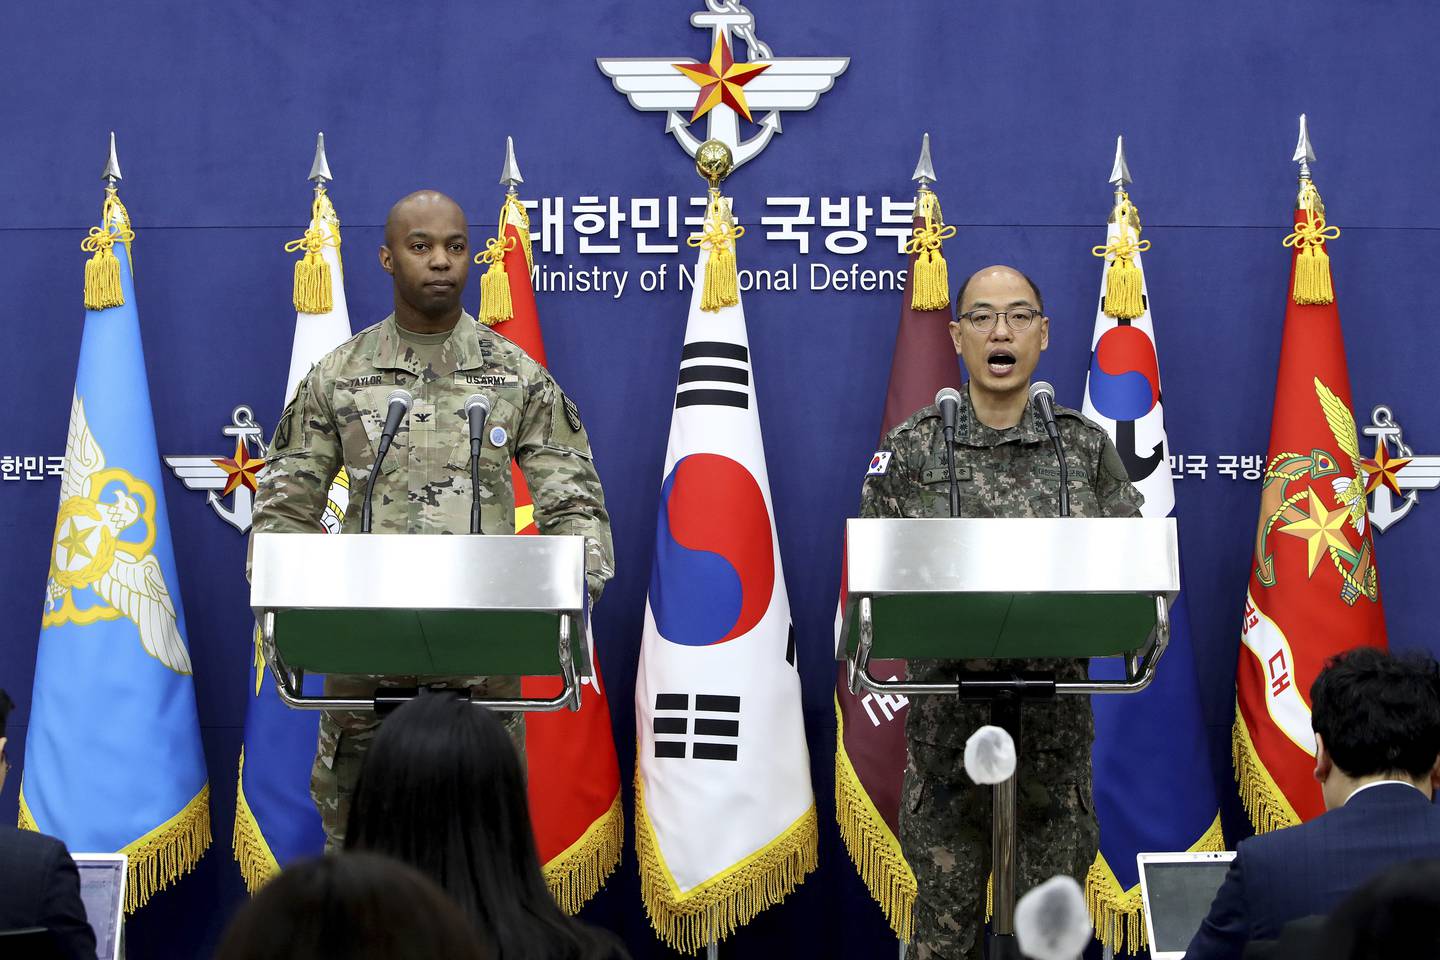 Col. Isaac Taylor, left, of the United Nations Command (UNC), Combined Forces Command (CFC), and United States Forces Korea (USFK) and Col. Lee Sung-jun of South Korea's Joint Chiefs of Staff attend the press briefing of the Freedom Shield Exercise at the Defense Ministry Friday, March 3, 2023 in Seoul, South Korea.